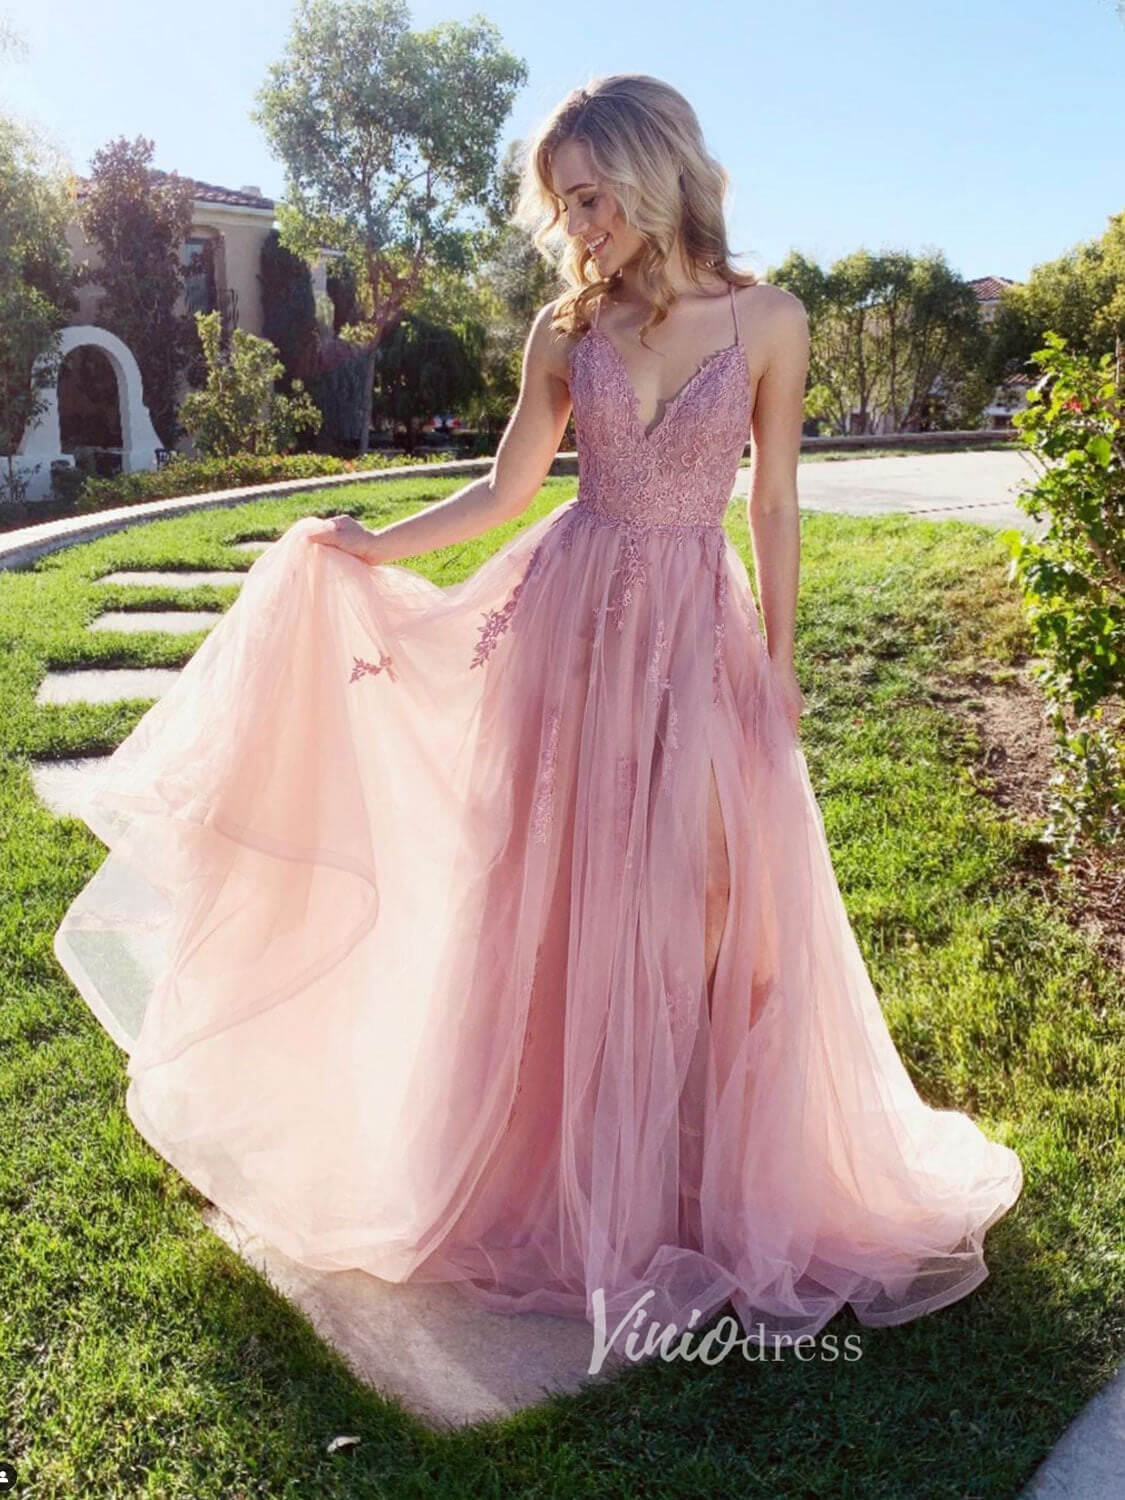 Bean Paste Pink Prom Dresses Detachable Puff Sleeves Boat Neck Tulle  Applique Beads A Line Wedding Party Celebrity Evening Gowns - AliExpress